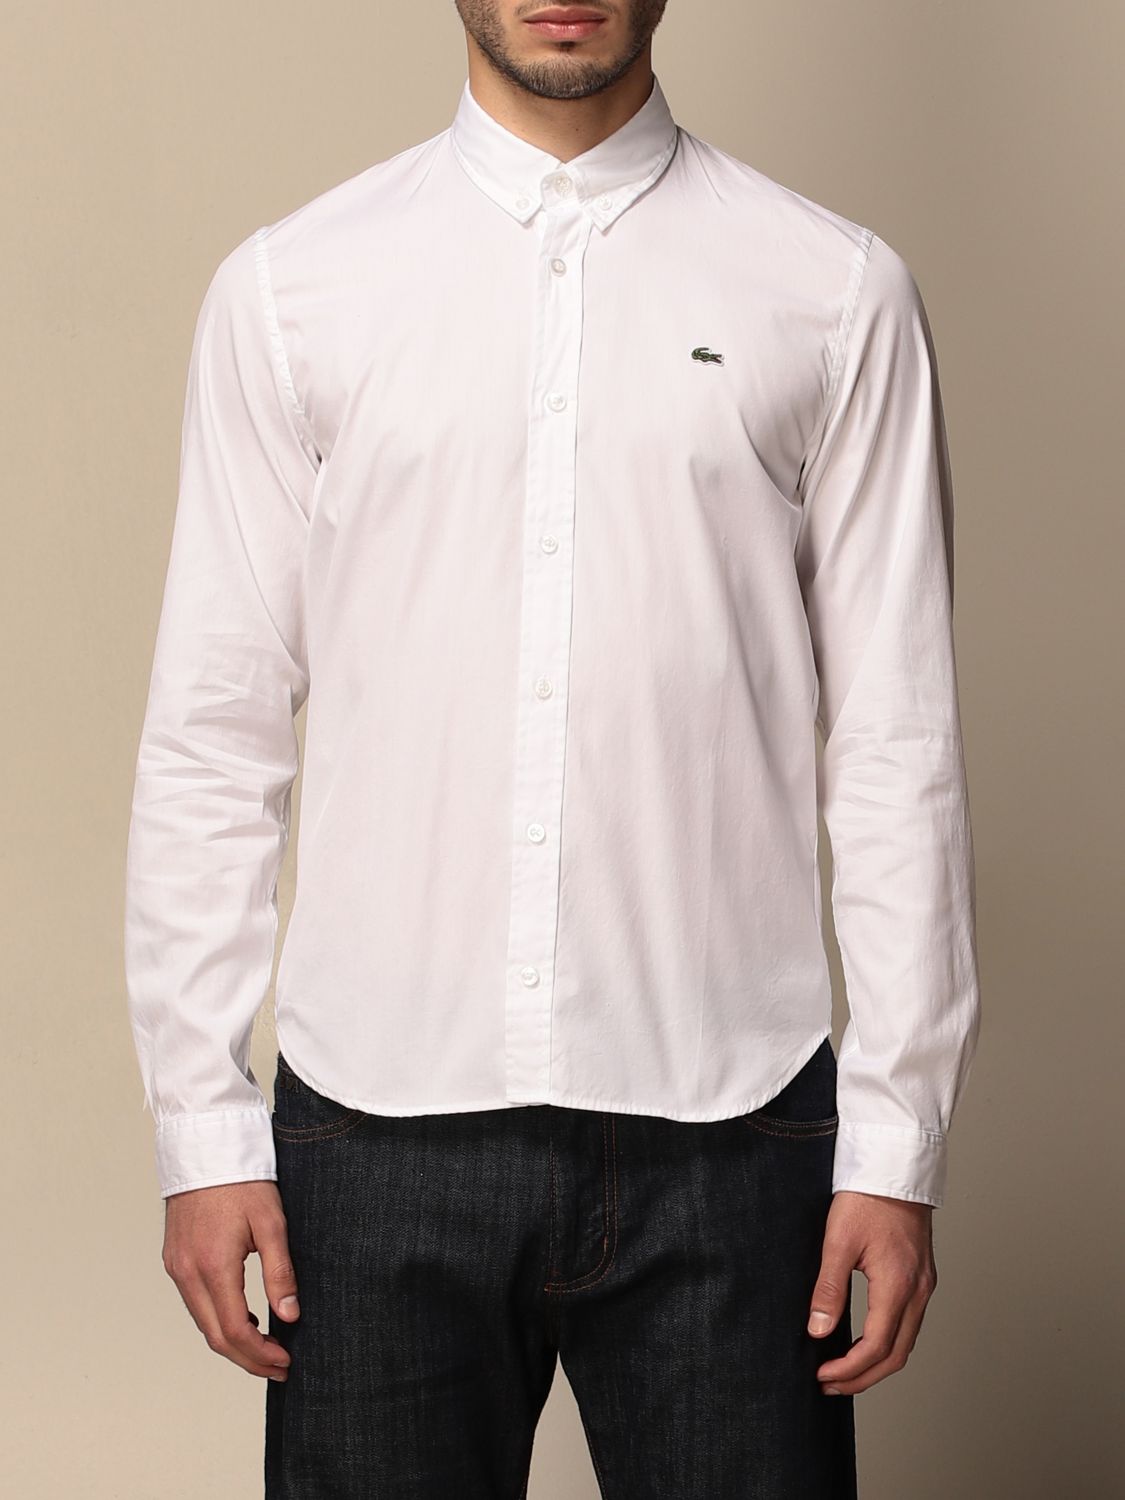 at se filter Kompleks LACOSTE: shirt for man - White | Lacoste shirt CH1843 online on GIGLIO.COM